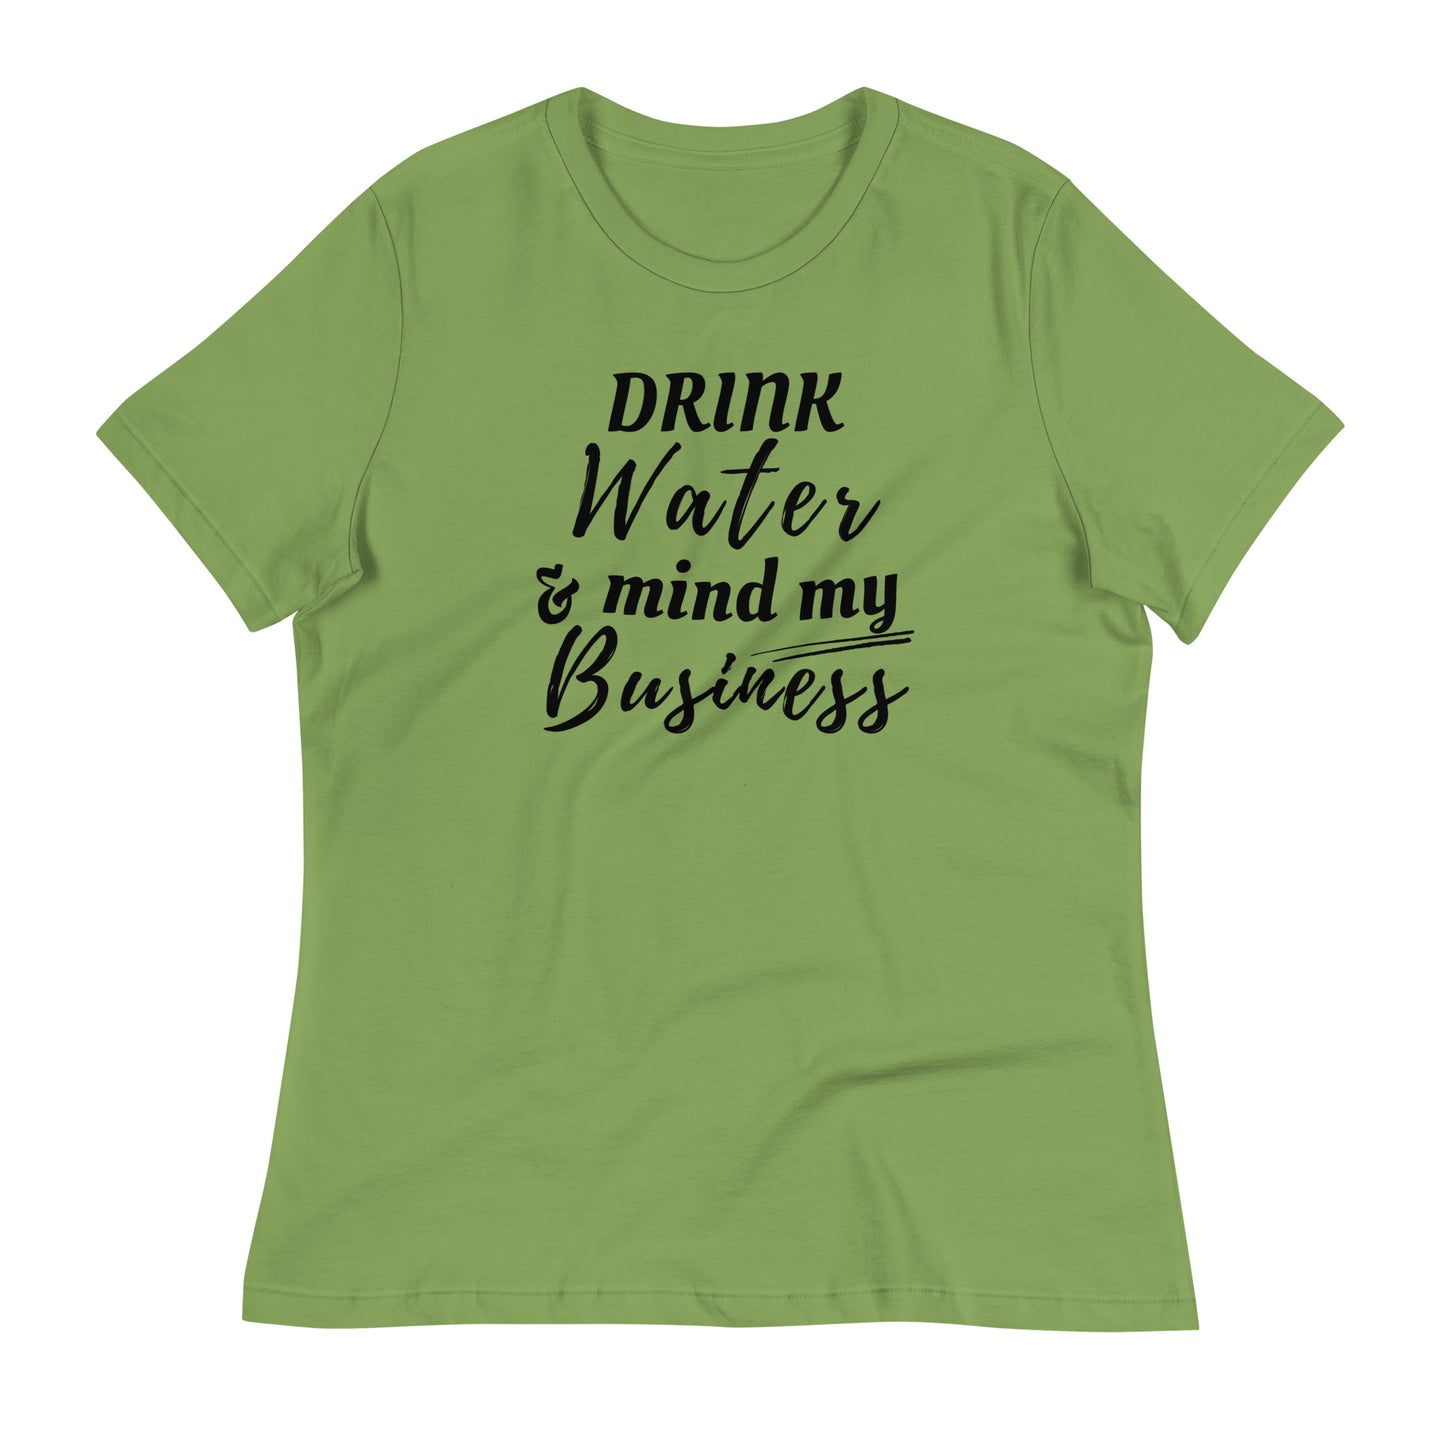 “Drink Water and Mind my Business” Women's T-Shirt